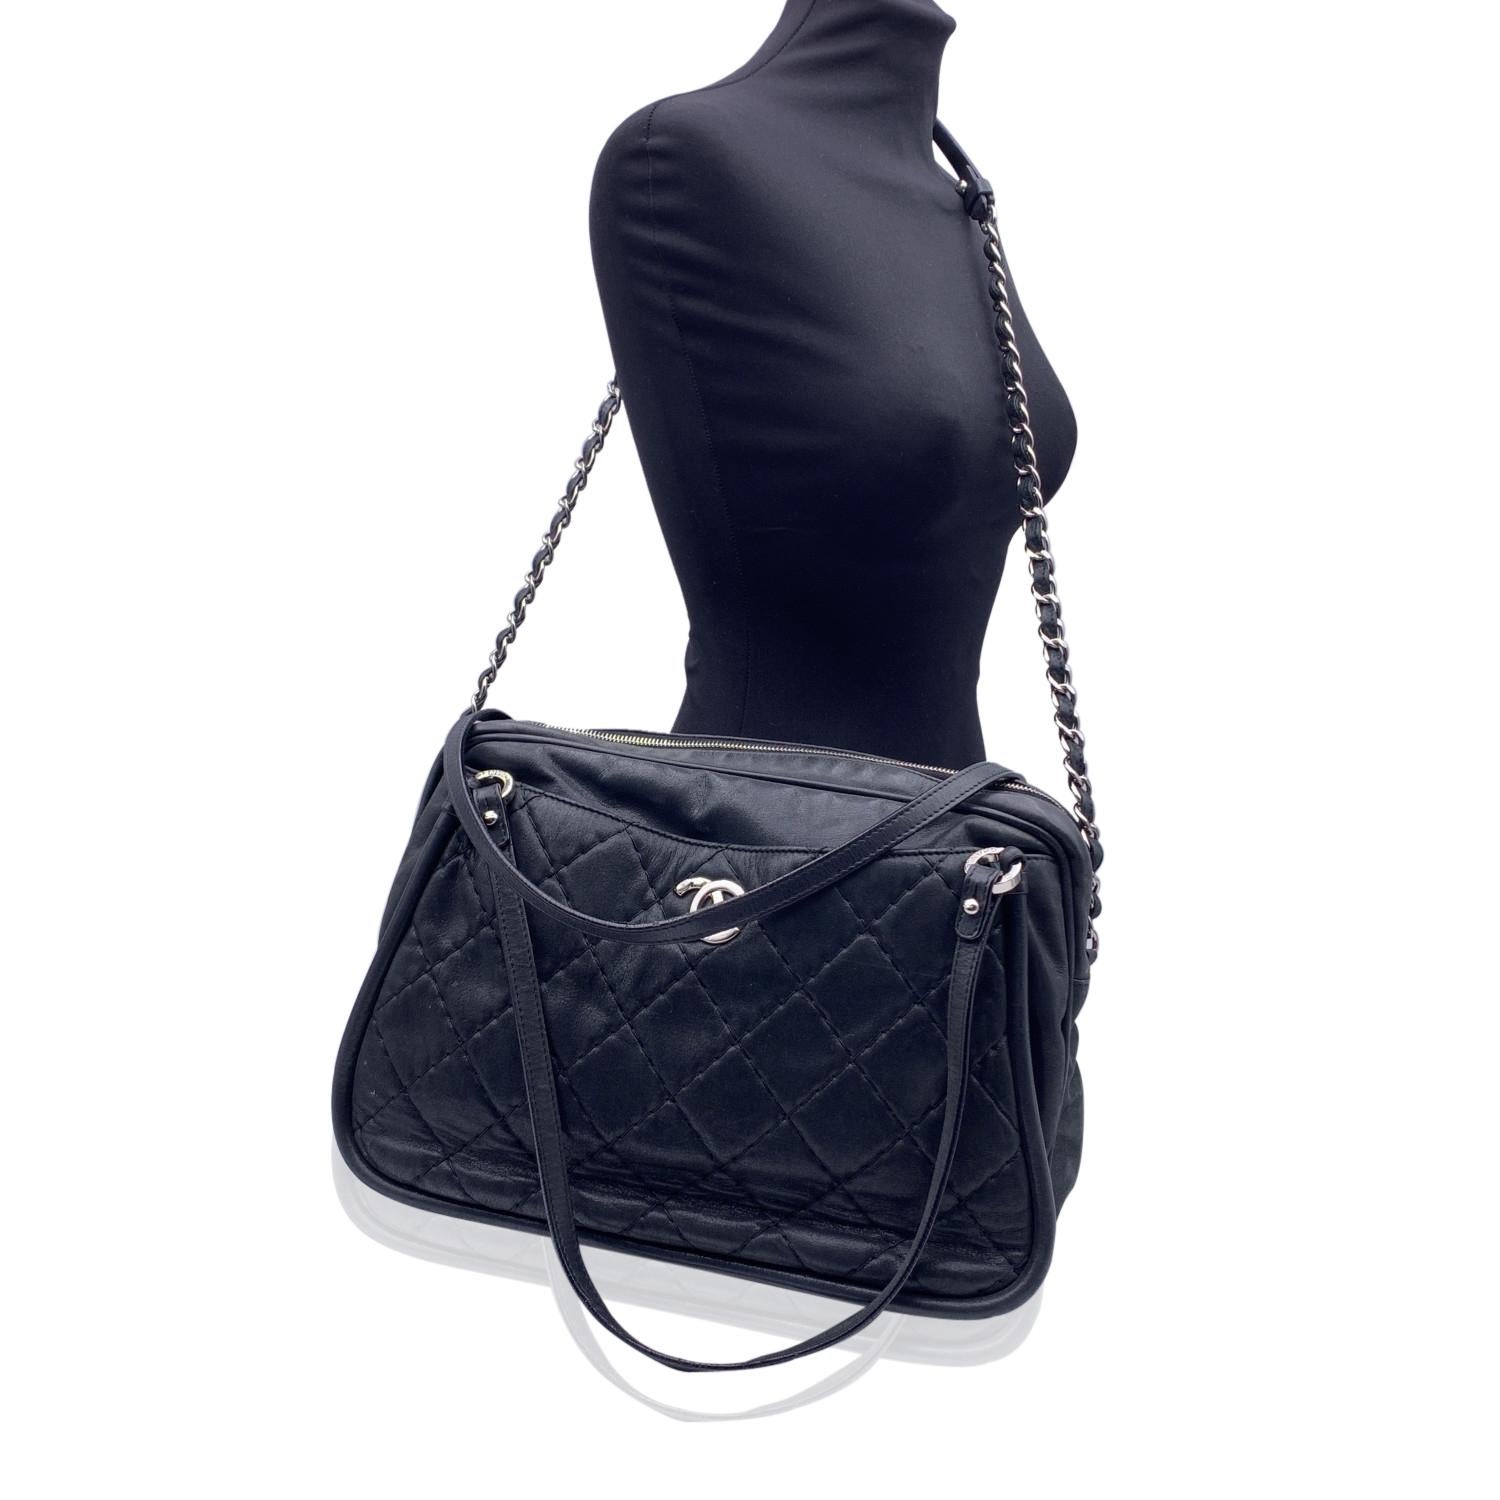 Chanel Black Quilted Leather Relax CC Tote Camera Shoulder Bag 4